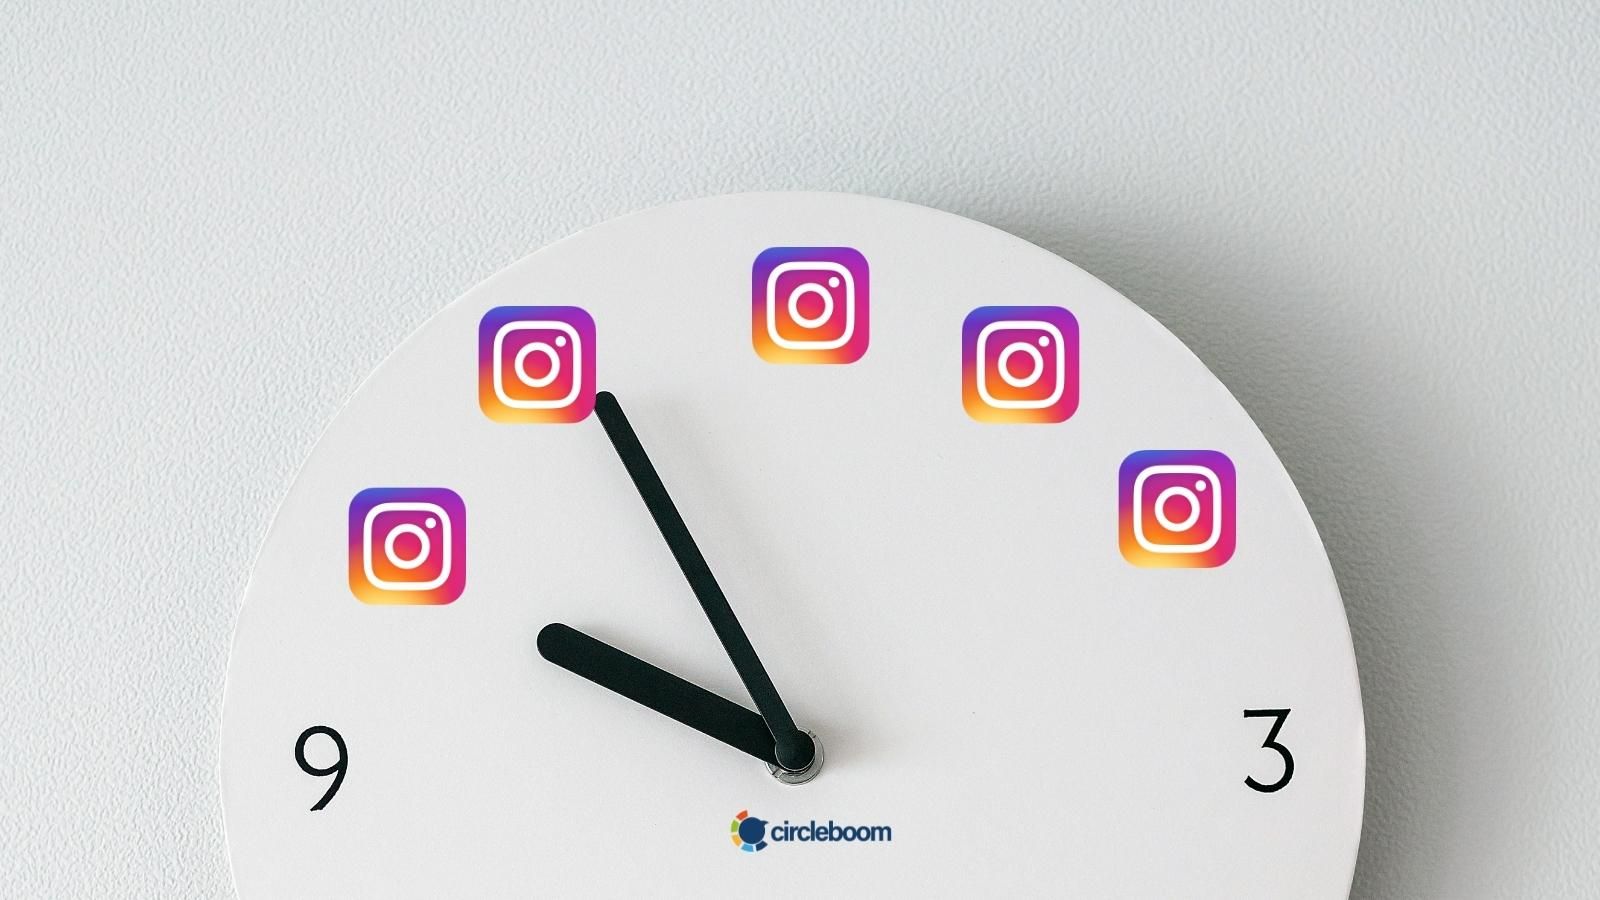 manage multiple Instagram accounts